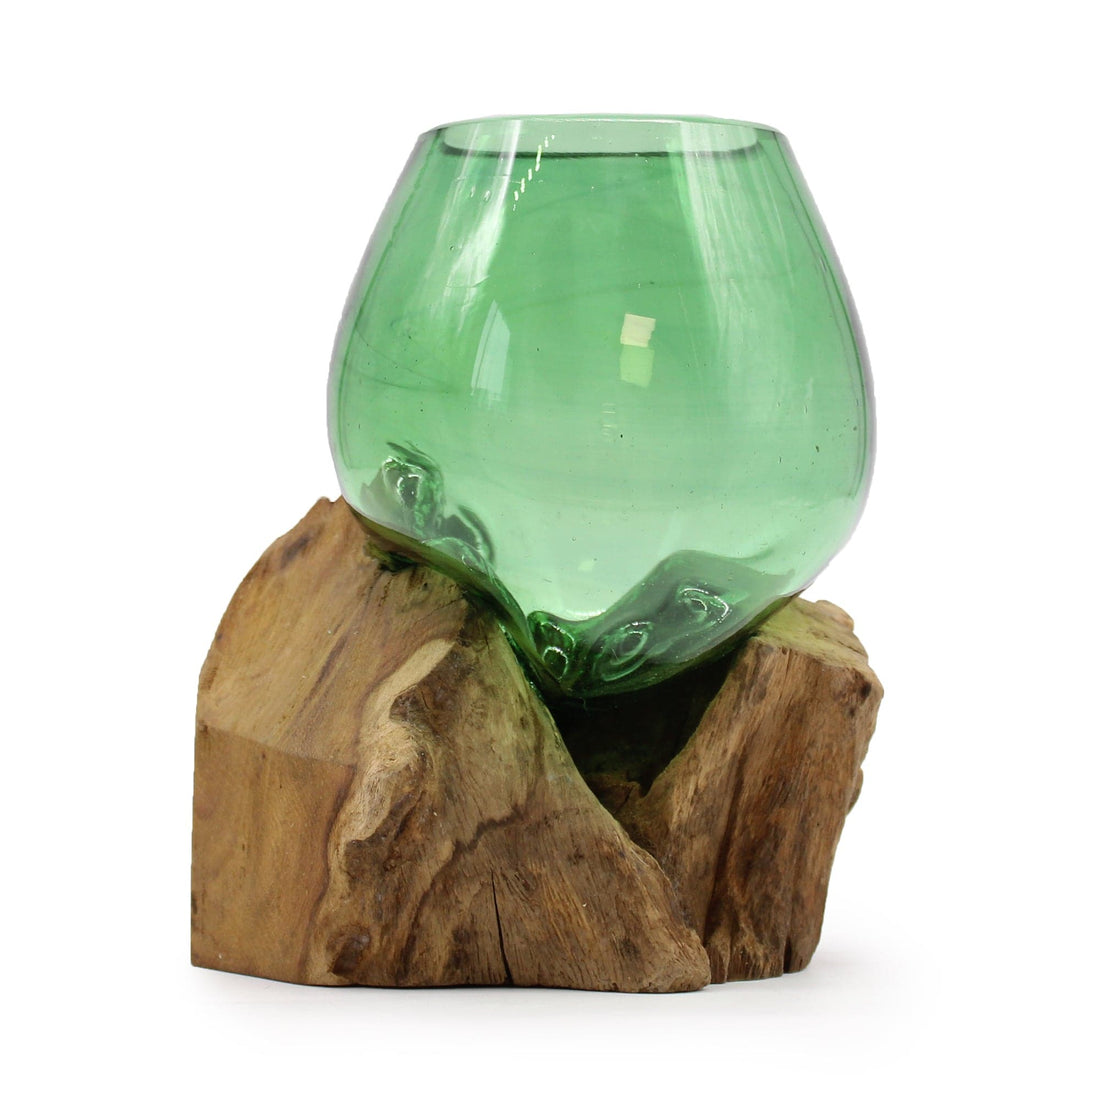 Recycled Beer Bottles - Small Bowl on Wood - best price from Maltashopper.com RBB-01